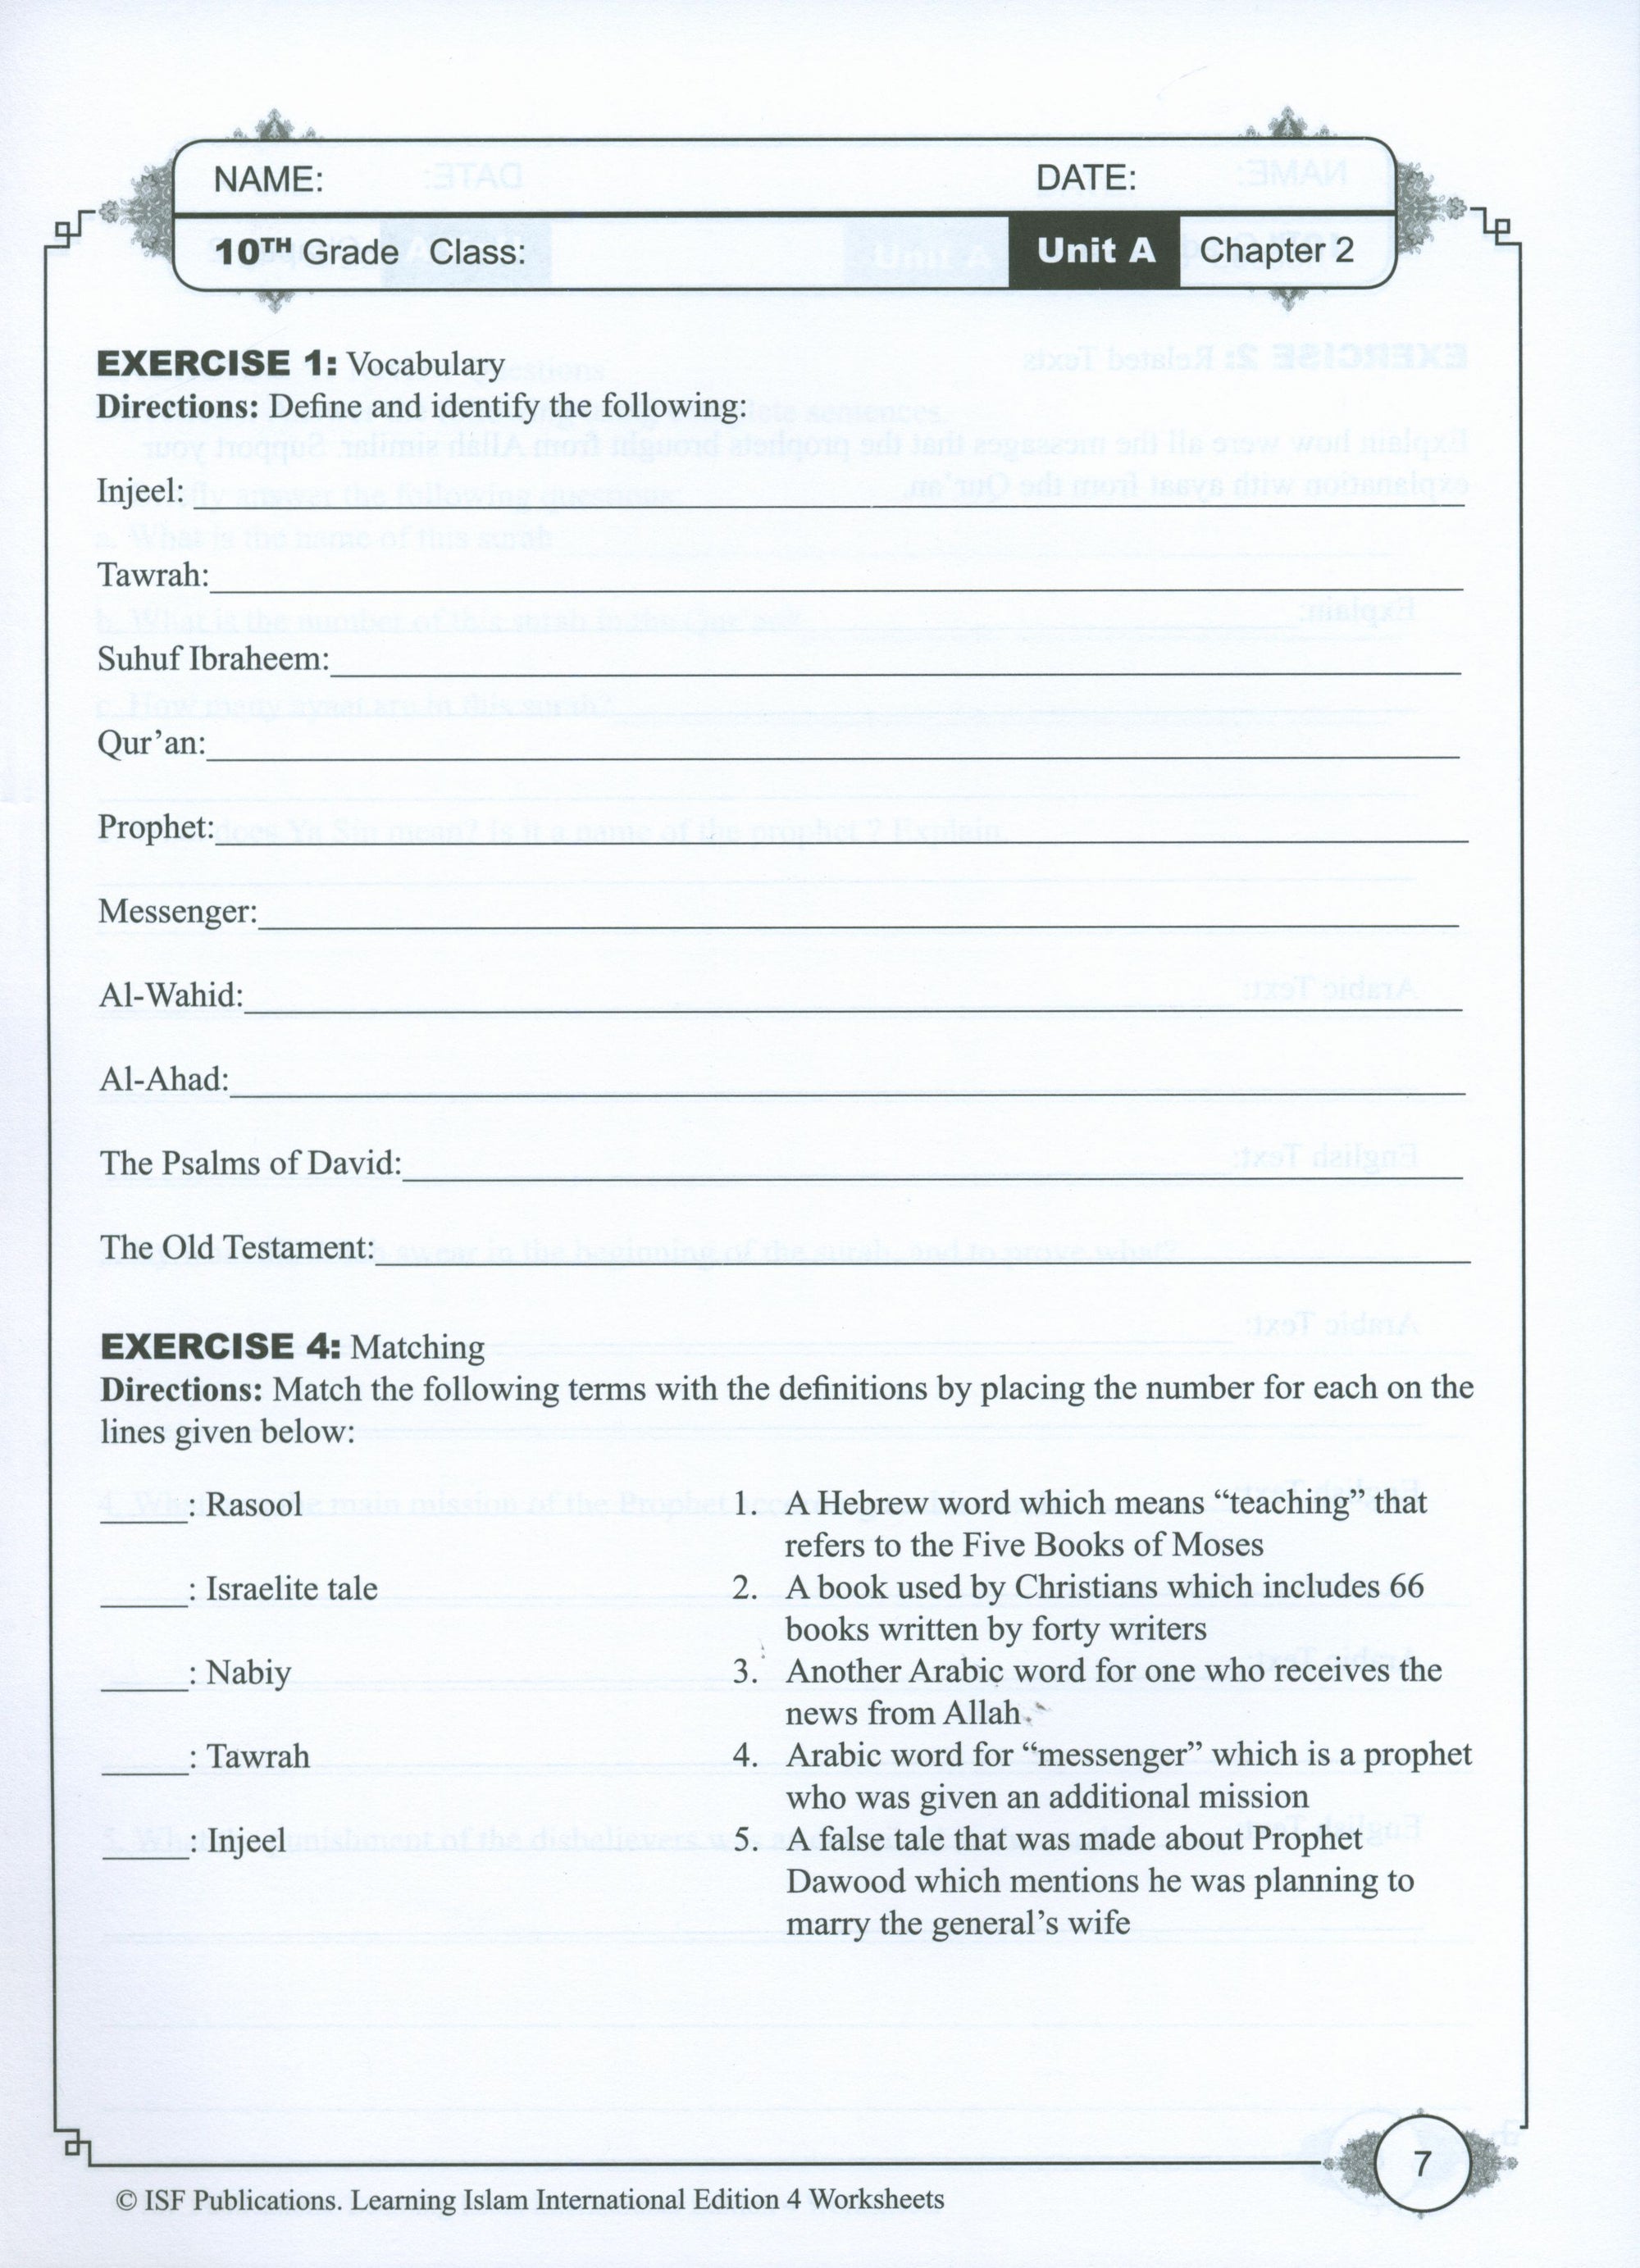 Learning Islam Weekend Edition Worksheets Level 4 (9th Grade)